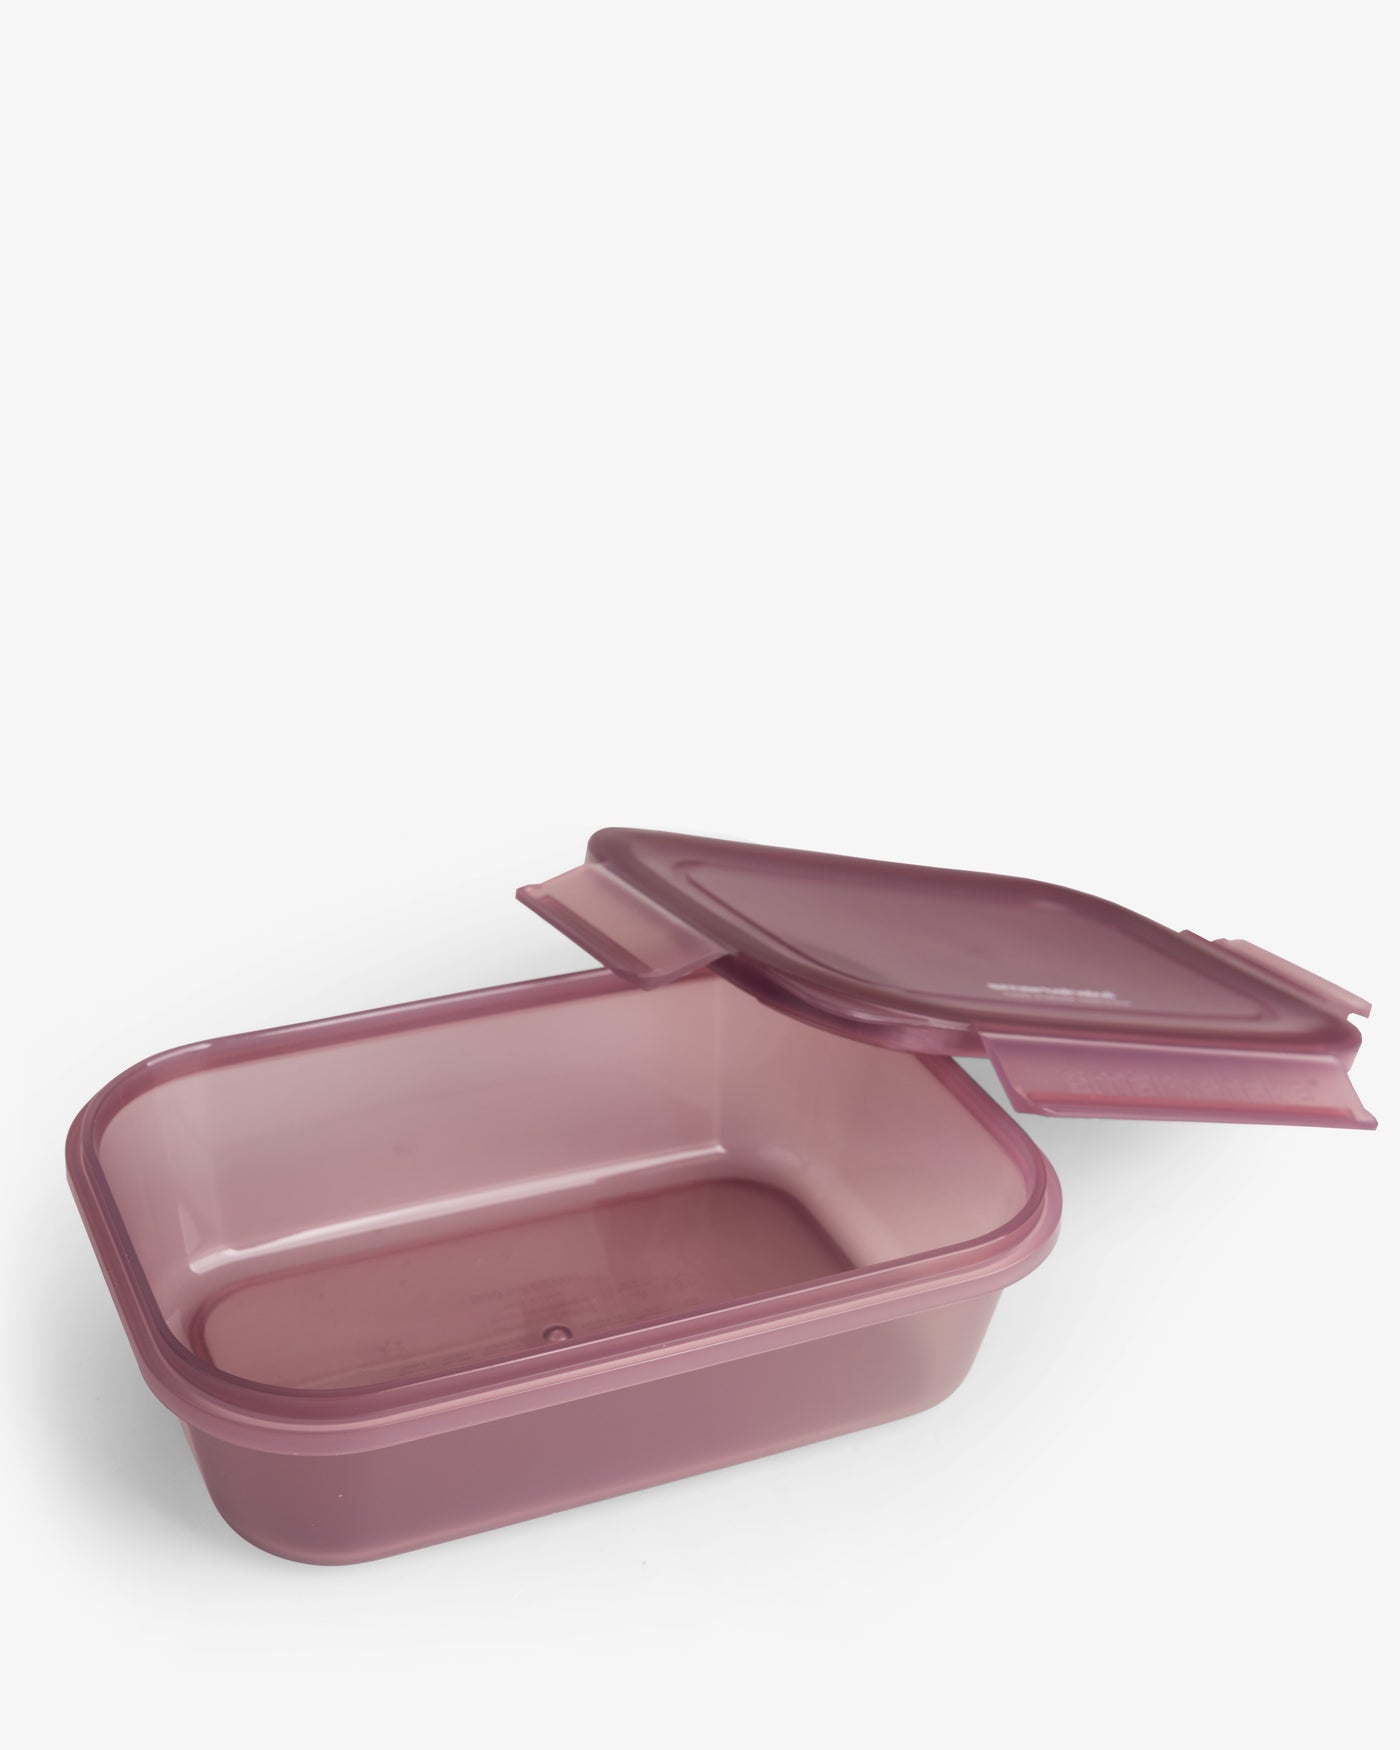 Buy 5 Food Storage Container and get 40% OFF